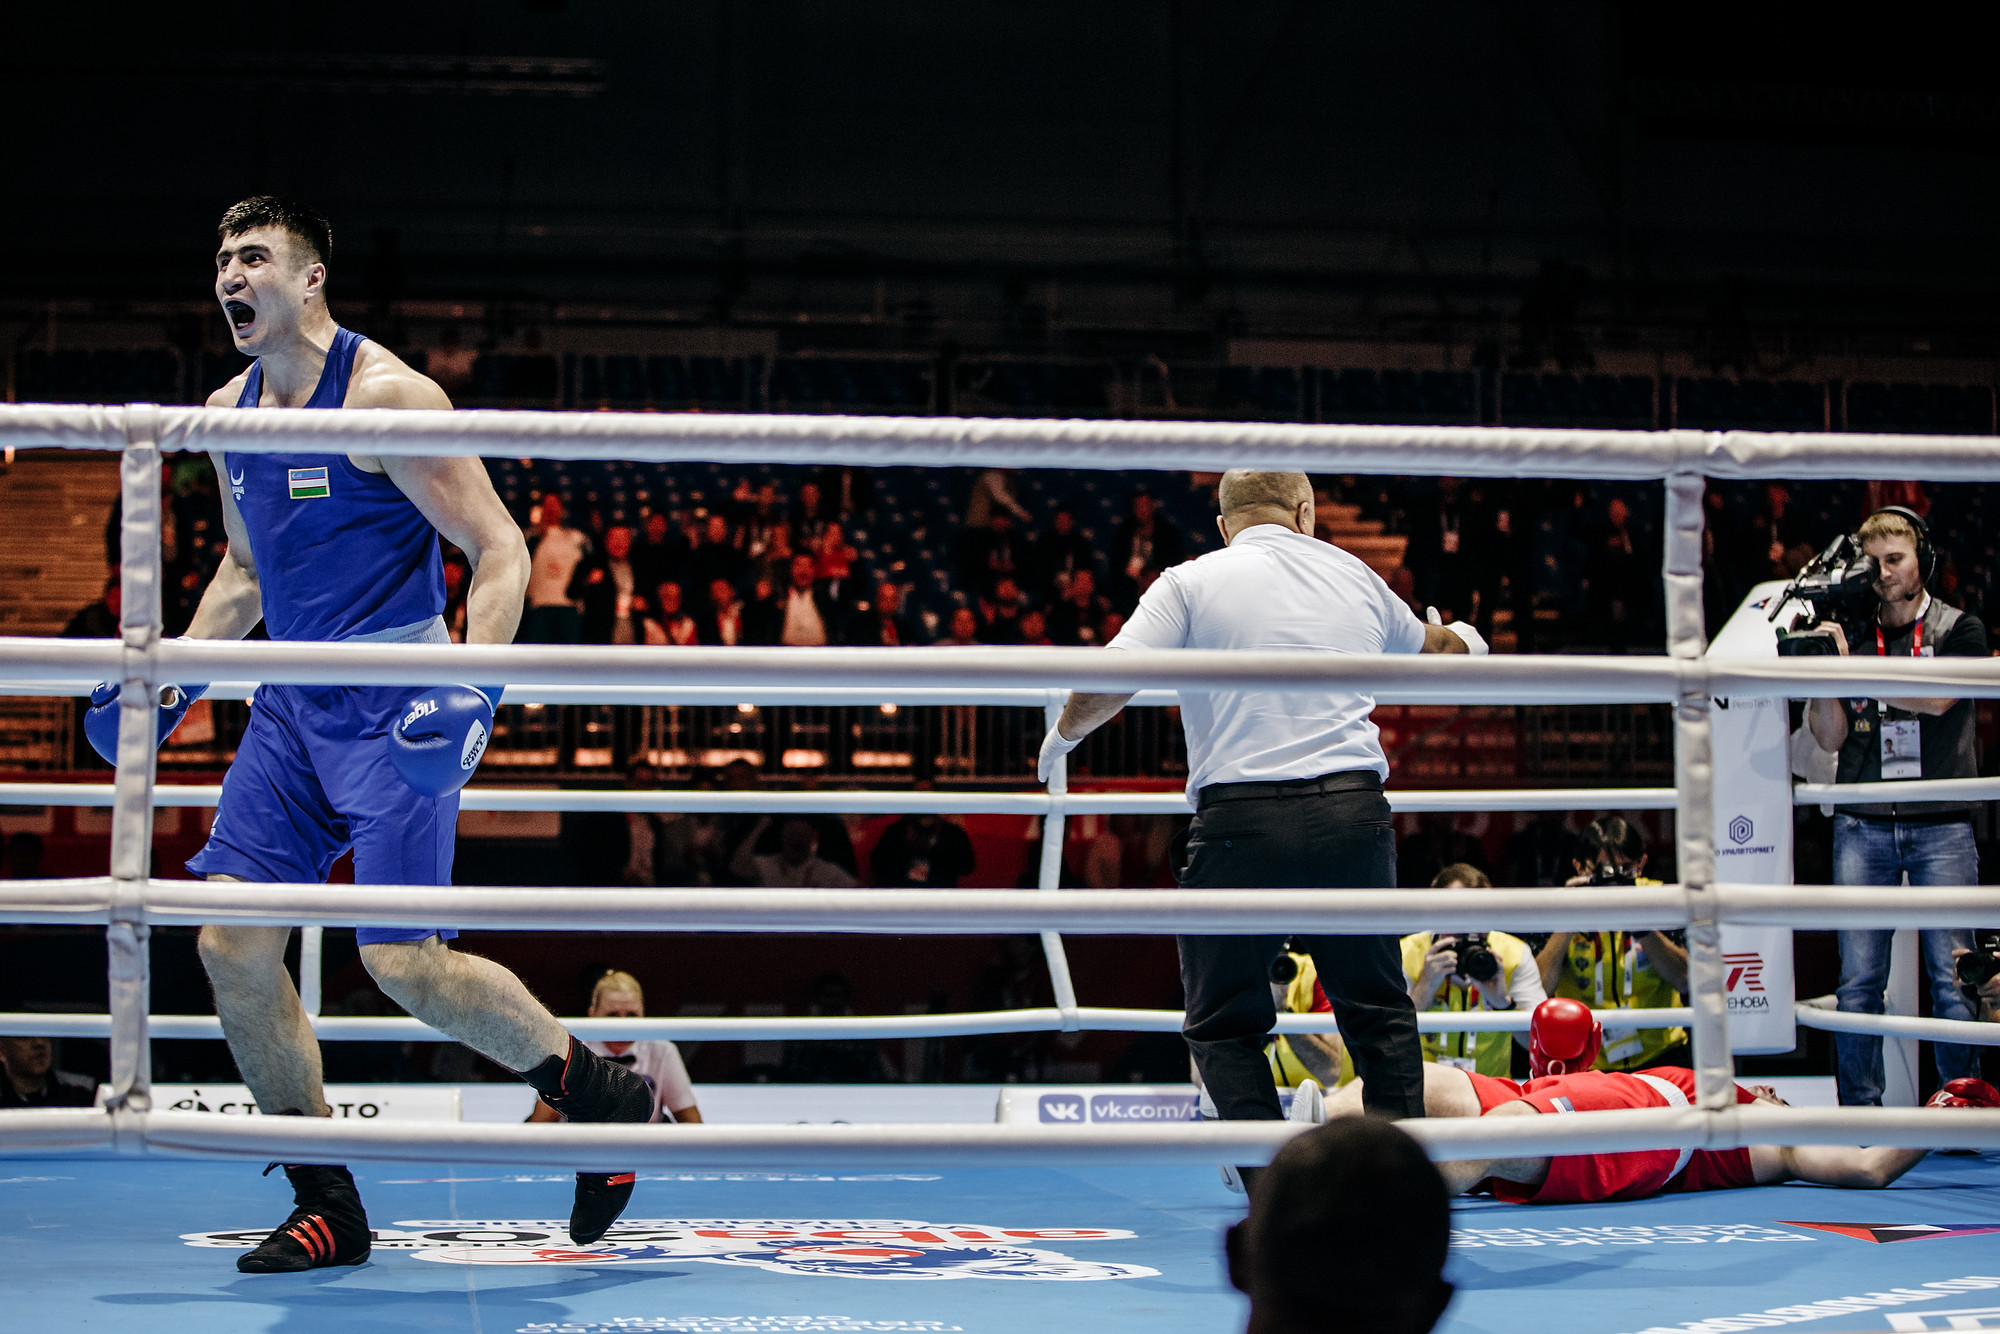 The Uzbek boxer delivered a knockout blow to Torrez to claim the victory ©Yekaterinburg 2019